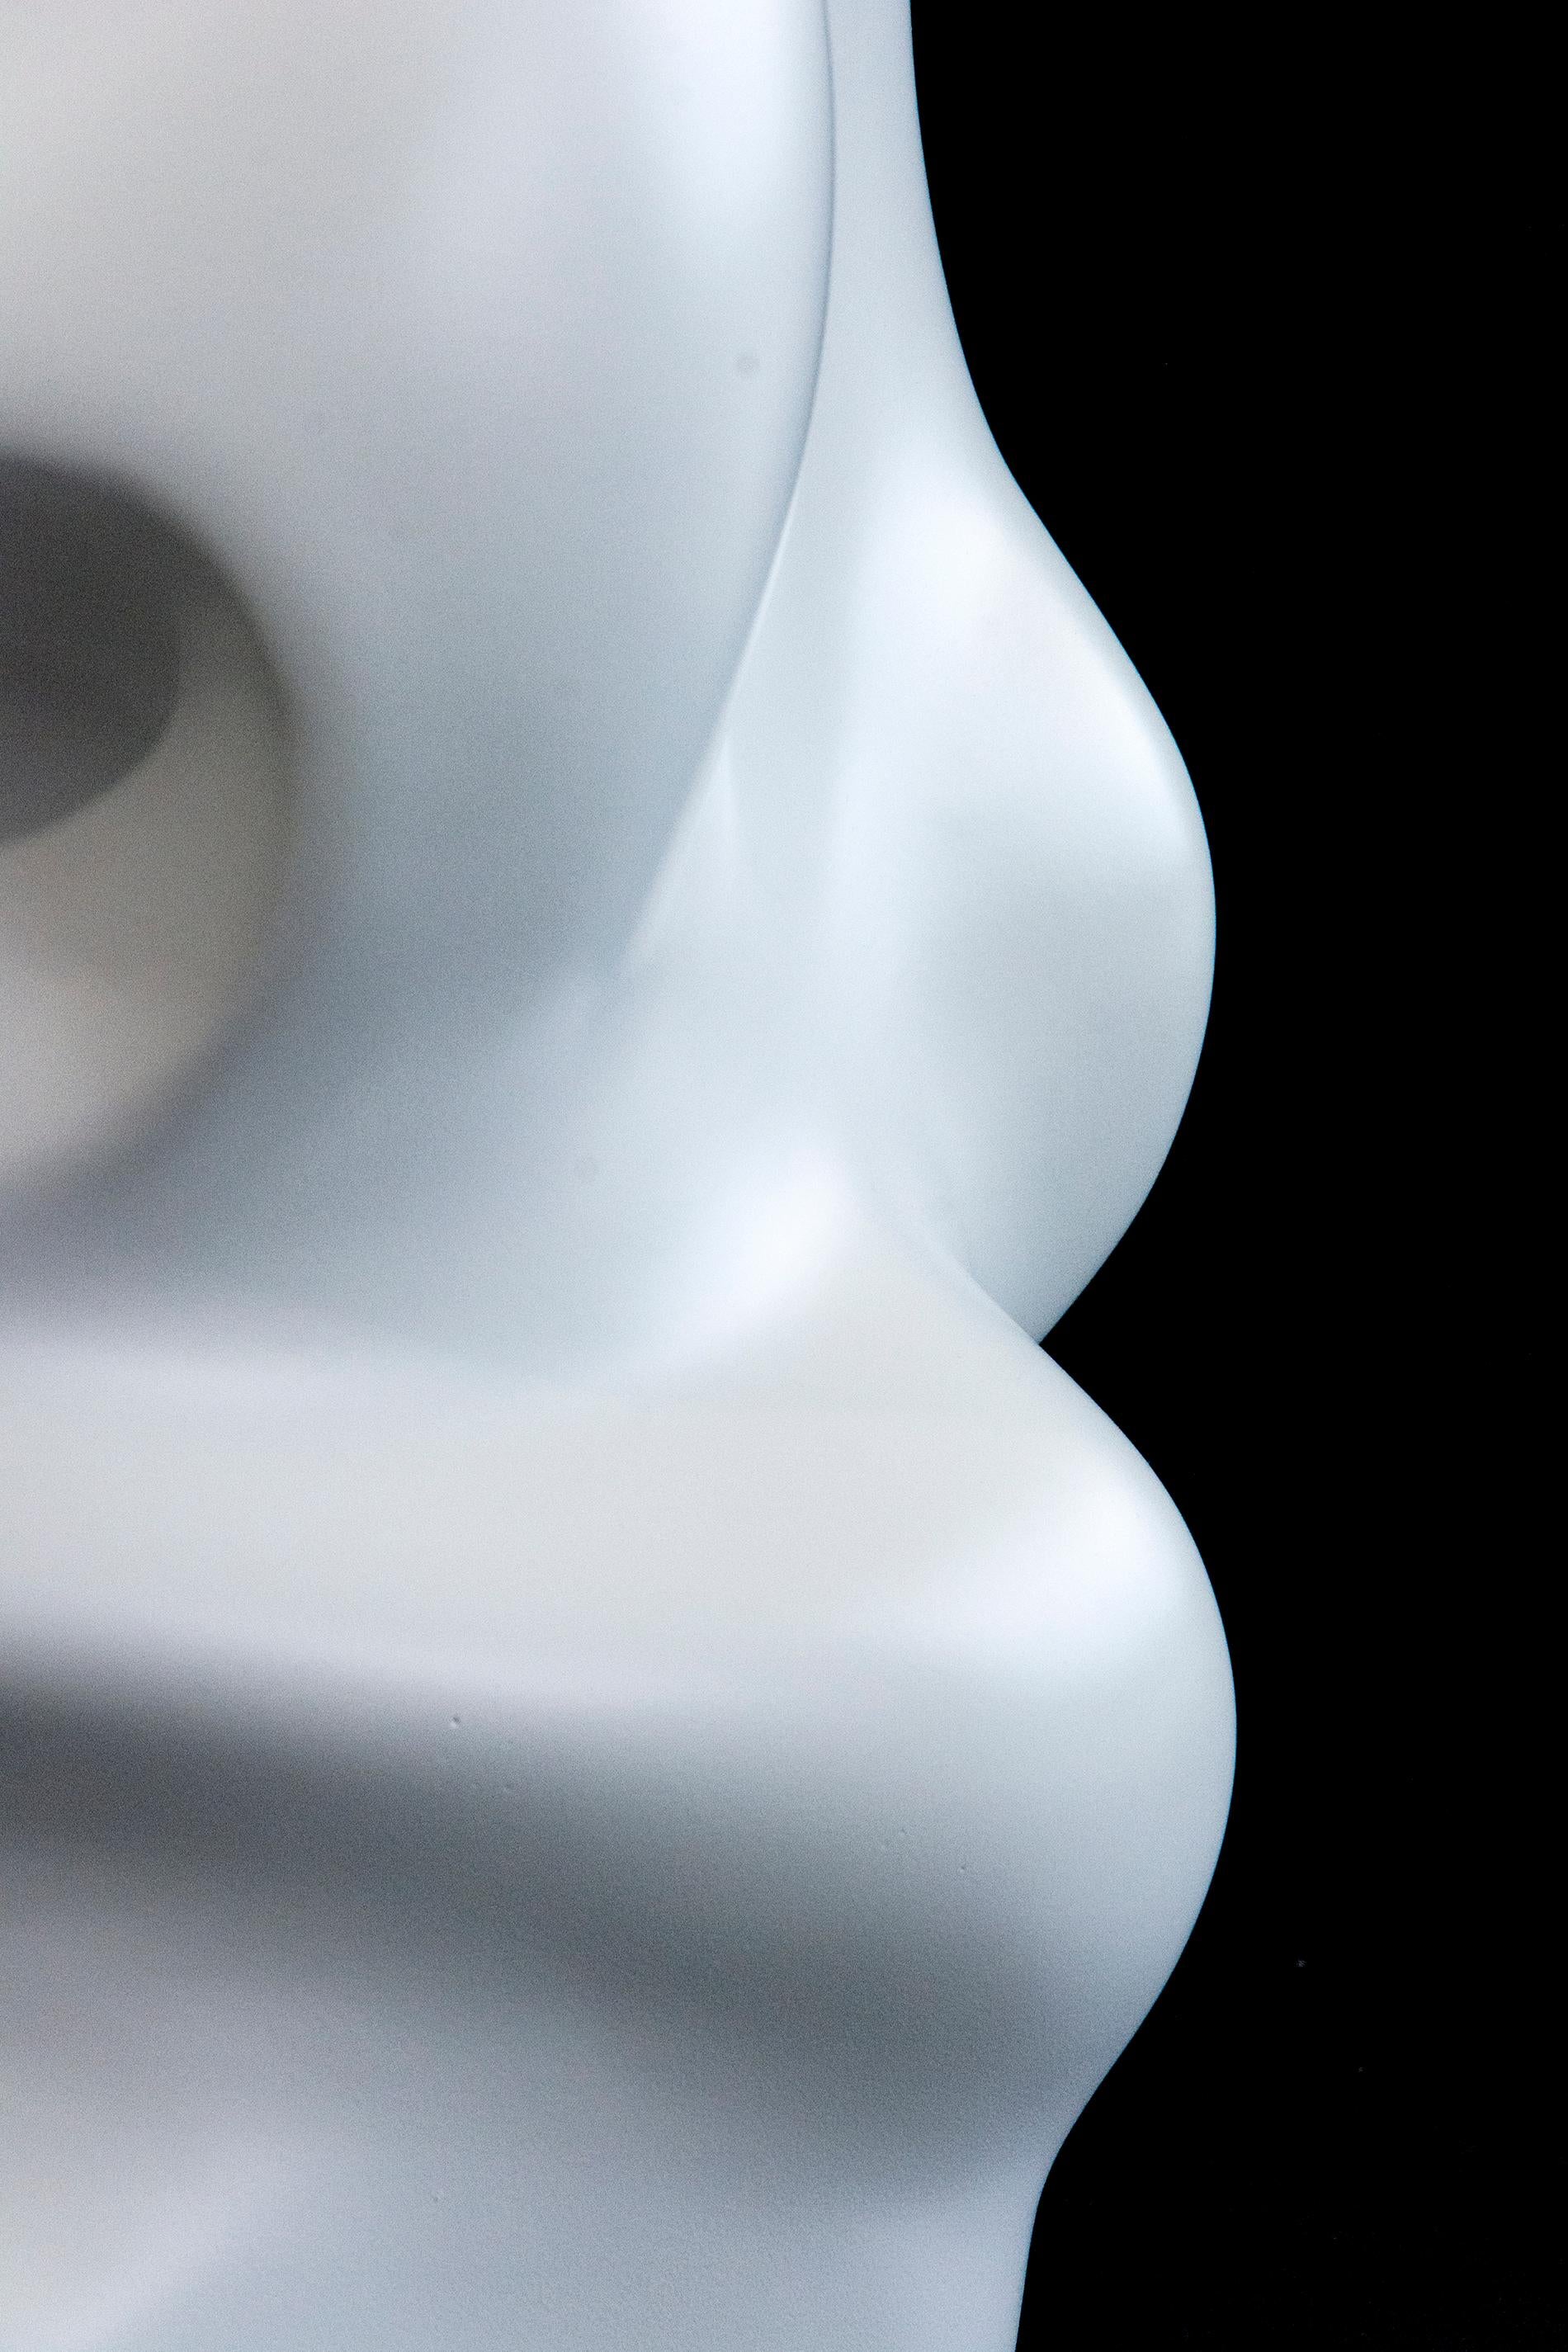 Cast in resin and coated in a satin white, this abstract sculpture by Tim Forbes twists and breathes as it rises. The dynamic movement of this work is informed by Forbes' training in graphic and interior design.

After completing studies at the Nova